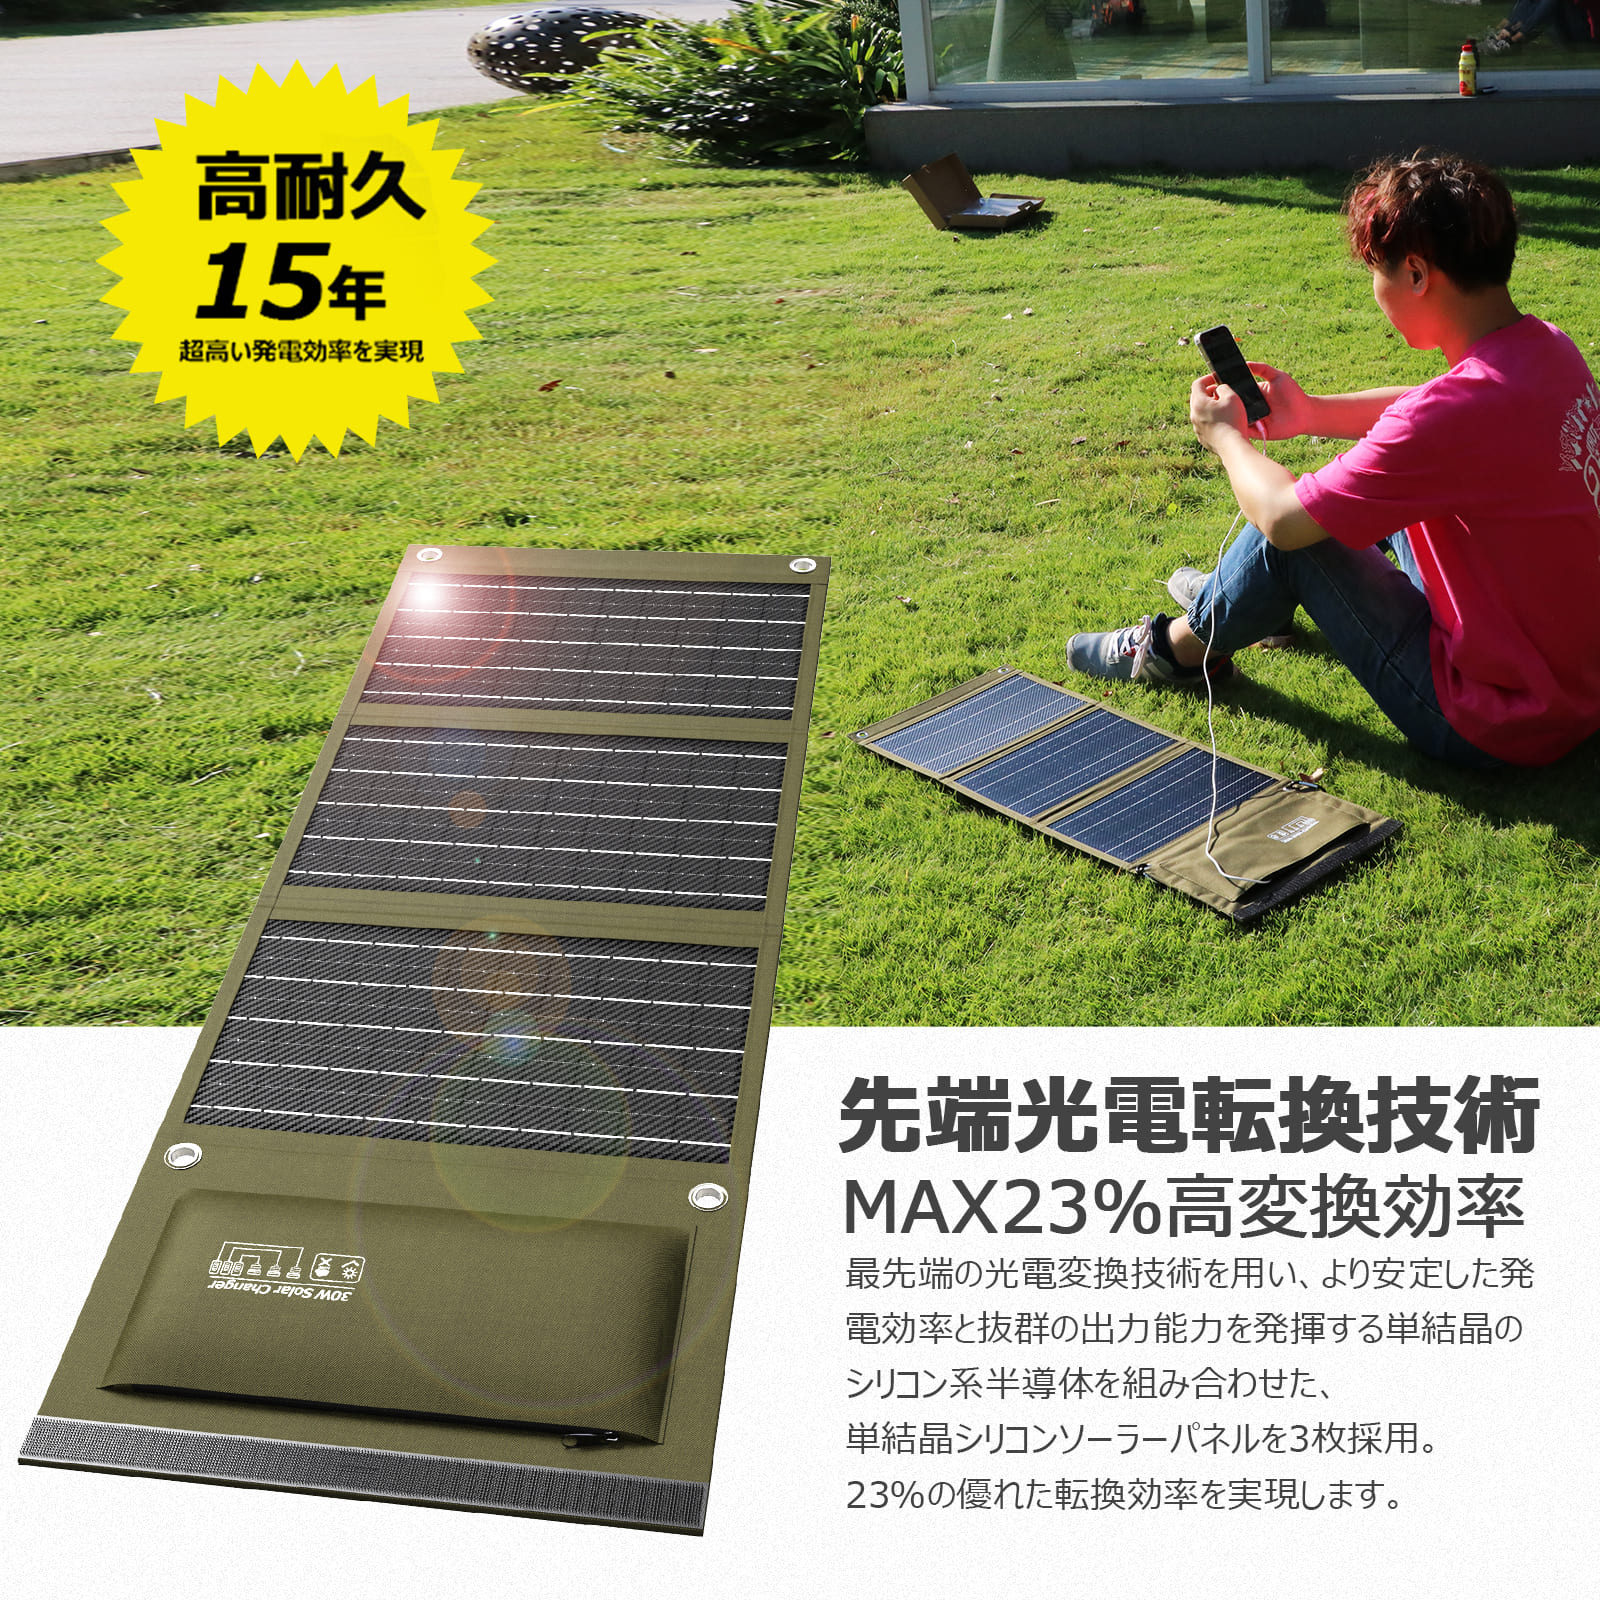  sale disaster prevention respondent .30W solar panel charger portable small size solar charger single crystal USB QC3.0 storage convenience light weight compact . electro- measures outdoors one year guarantee TYH-B3F